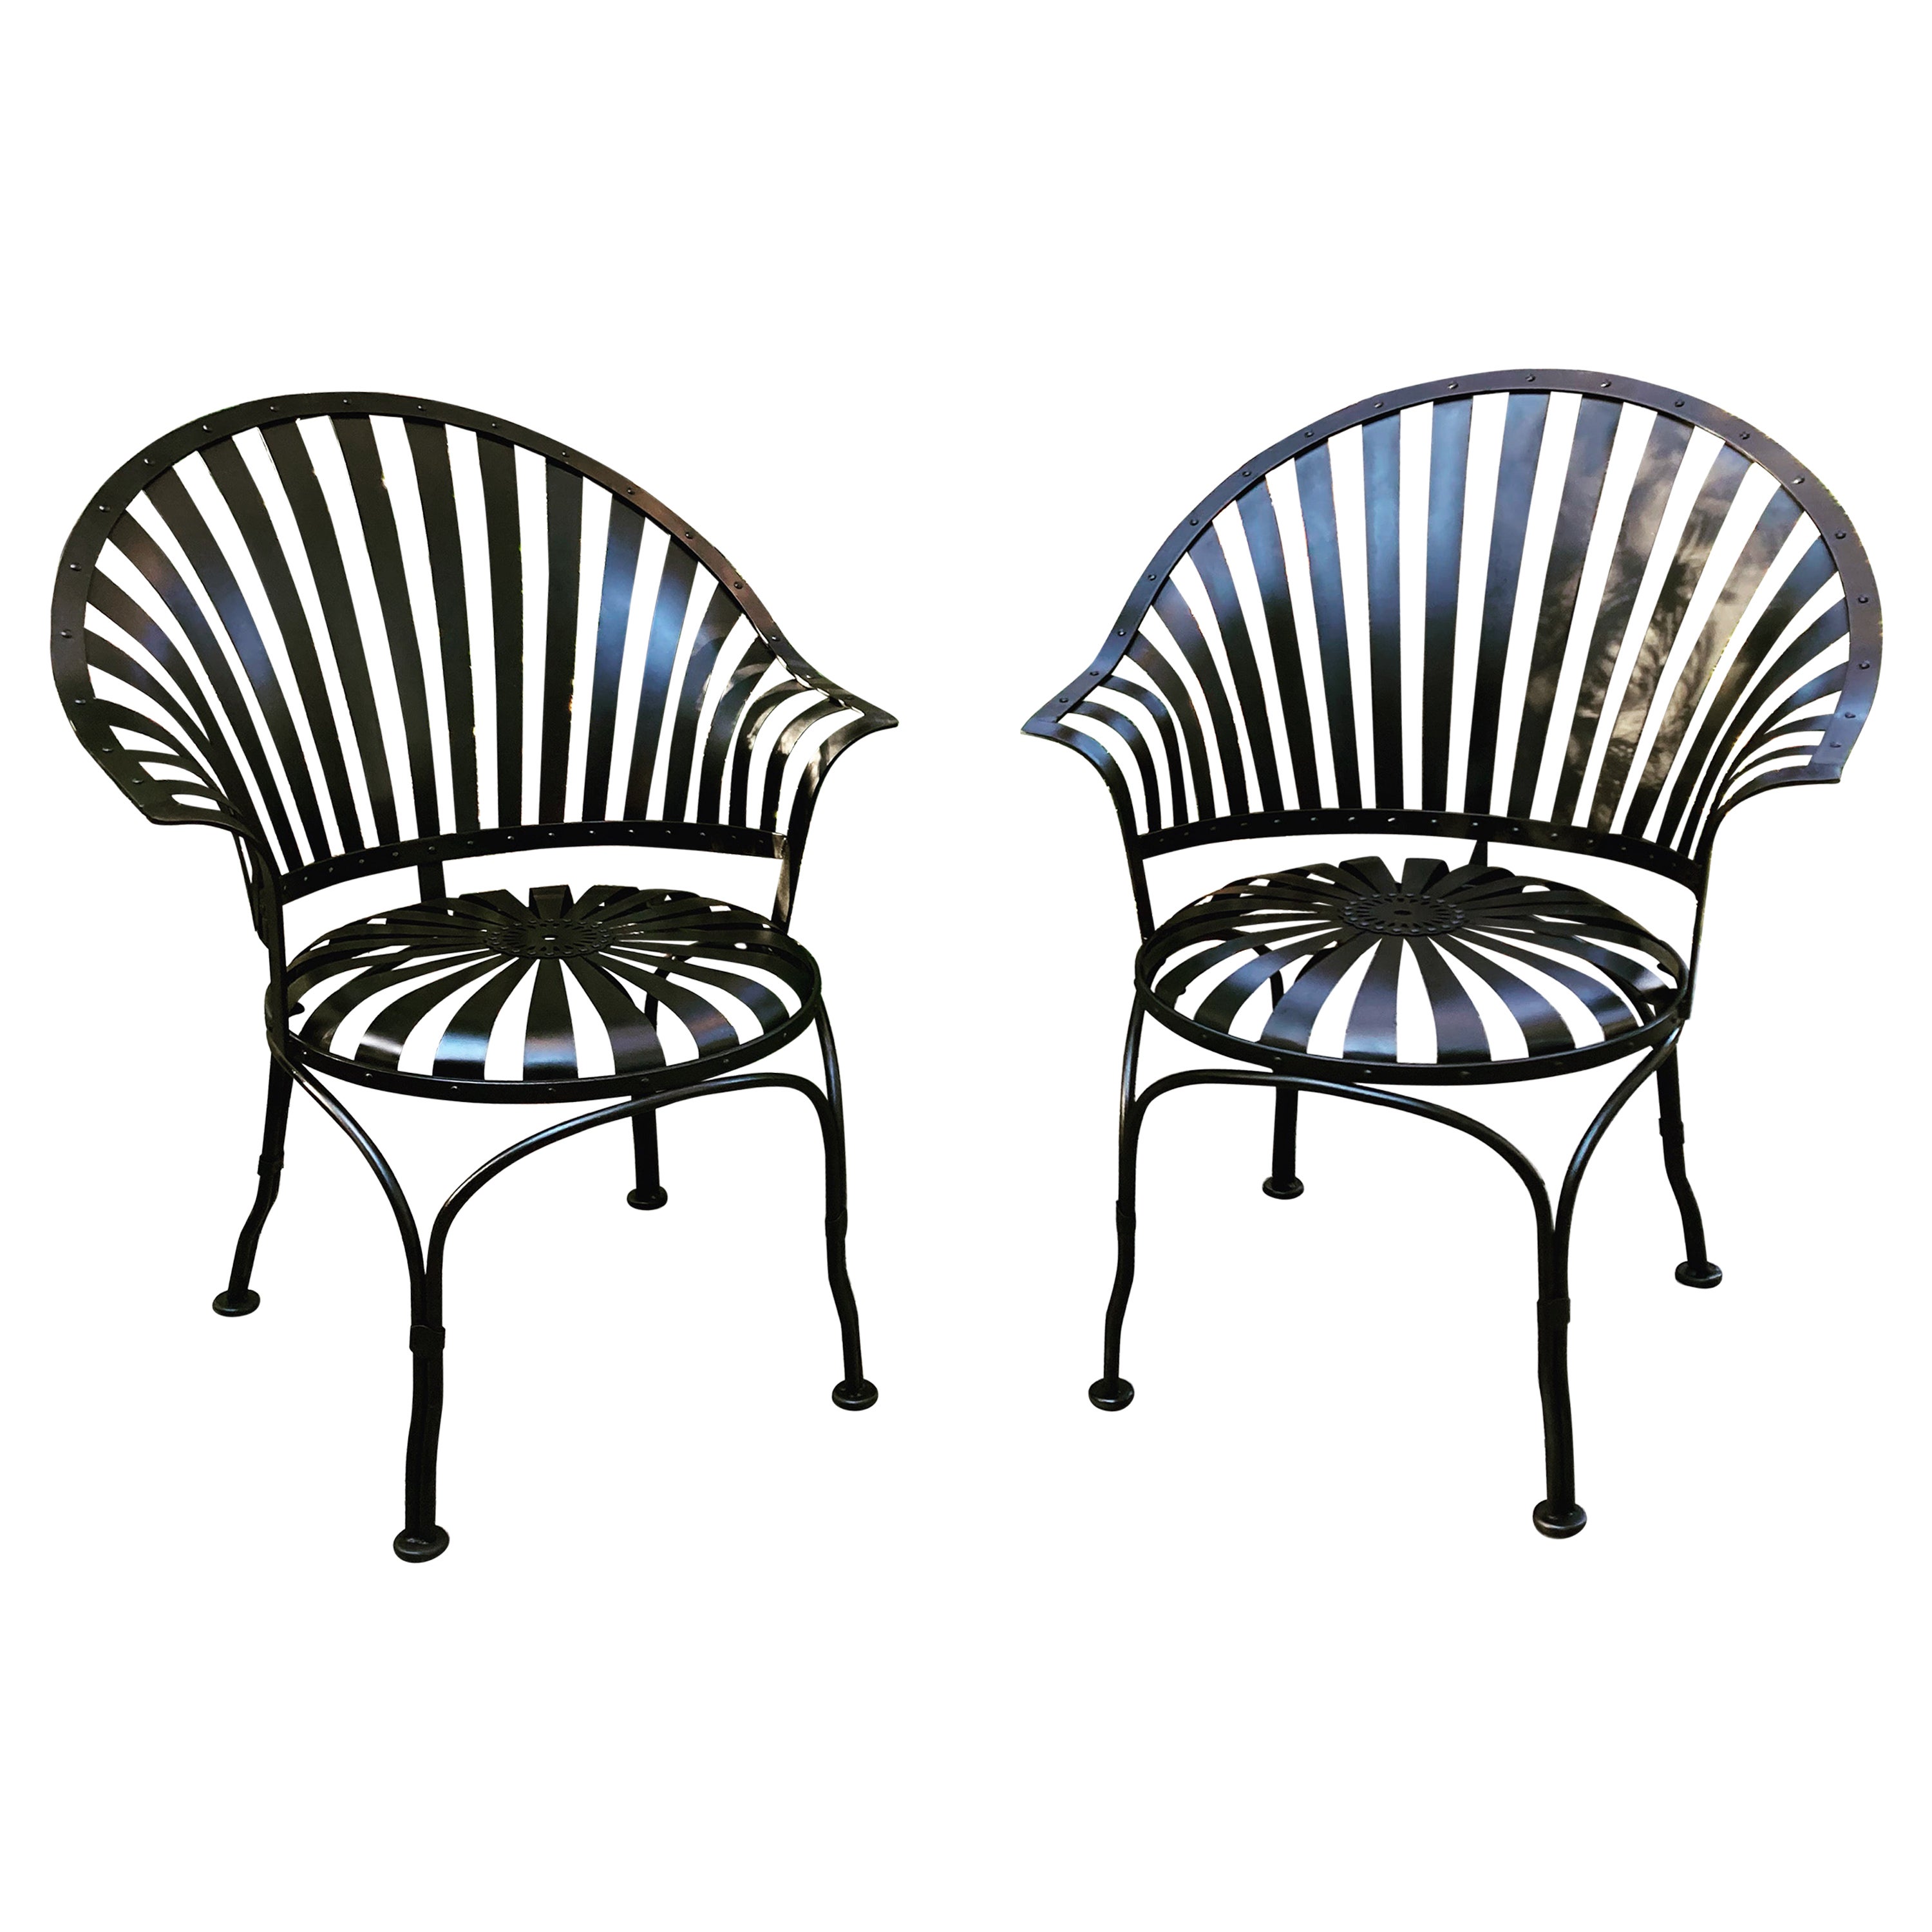 francois carre fan-back iron garden chairs - a pair